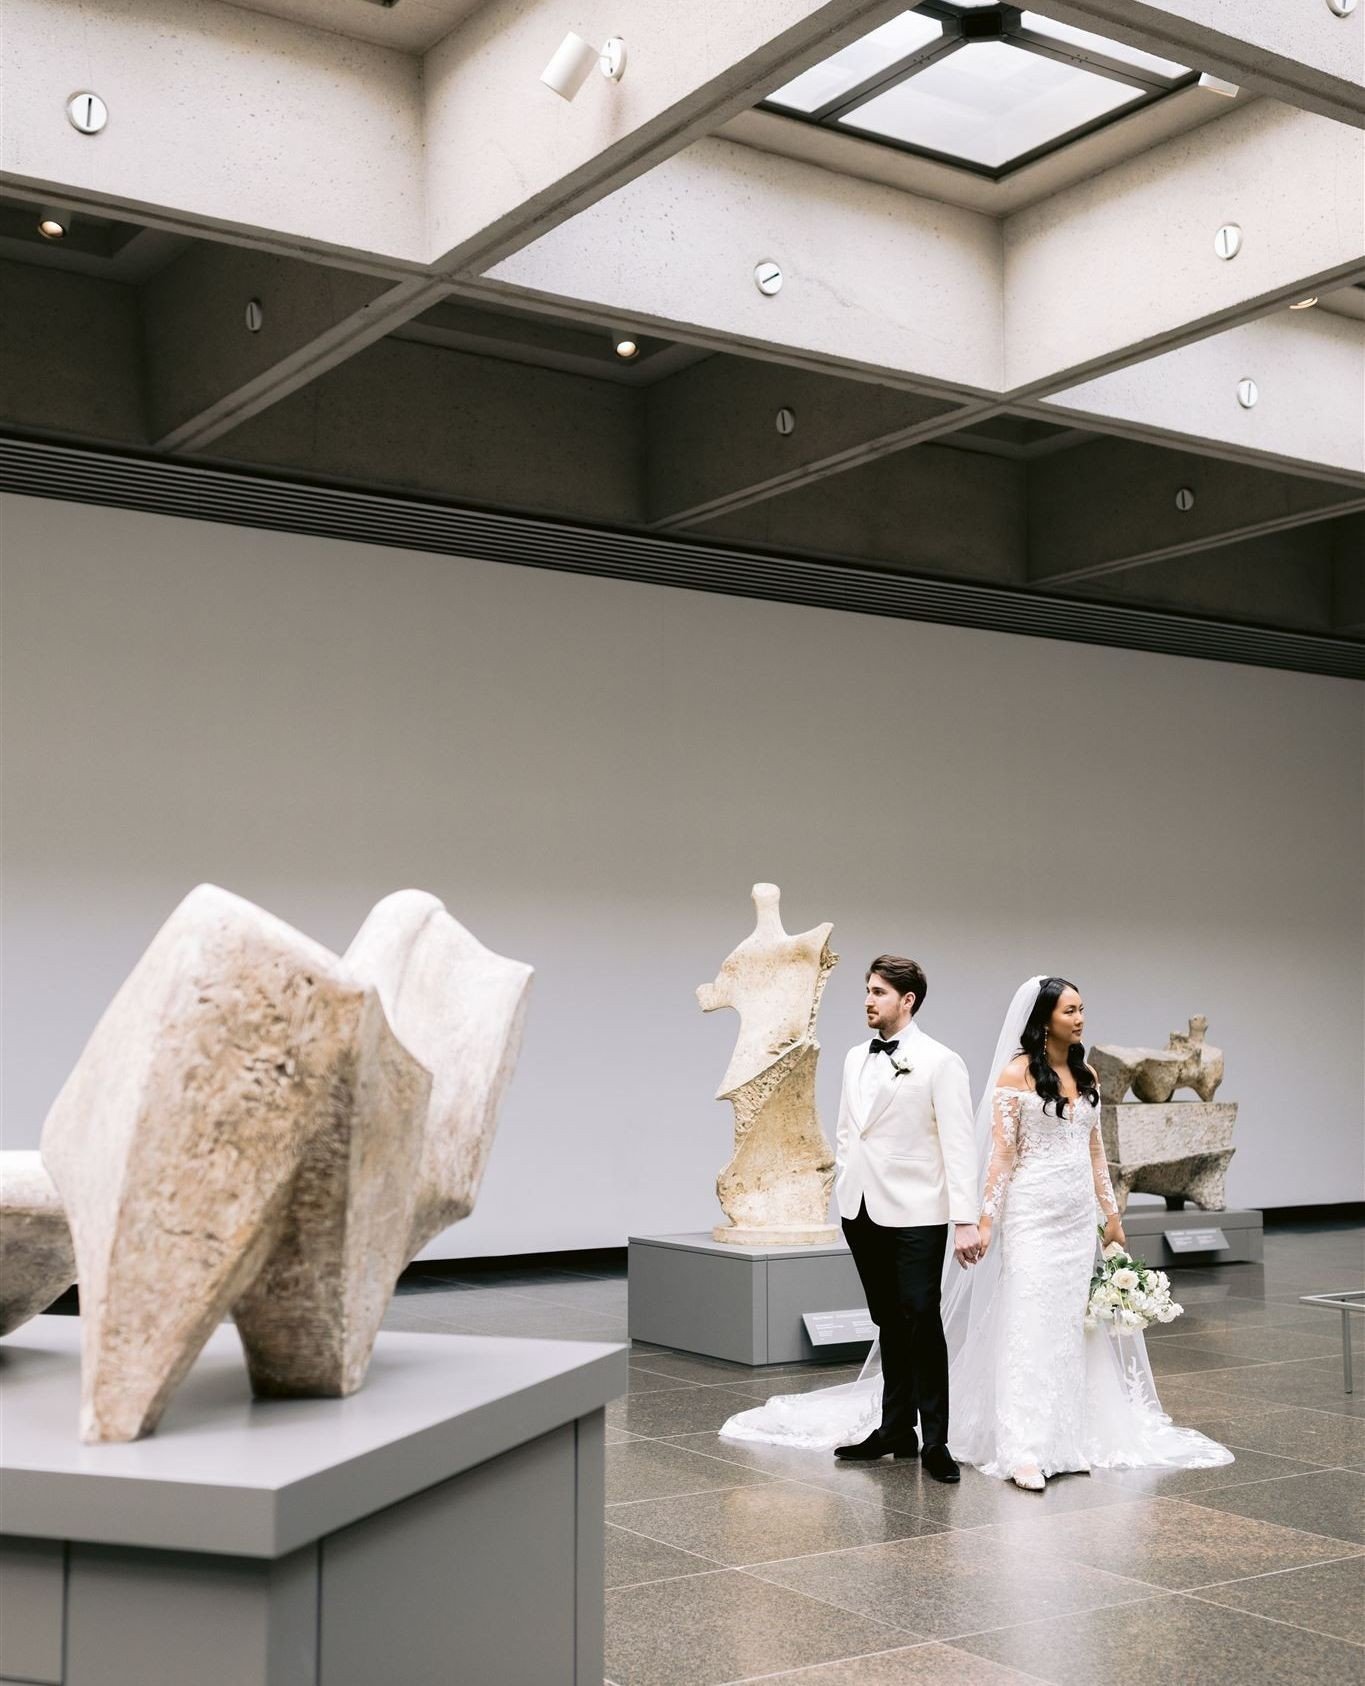 When you get married at the art gallery... you get a free pass to get into exclusive exhibits 👀⁠
⁠
Special thanks to this team for making such a beautiful wedding day!⁠
Wedding Planner - @behindtheido⁠
MUAH - @ford_beauty⁠
Florist - @delightfloralde